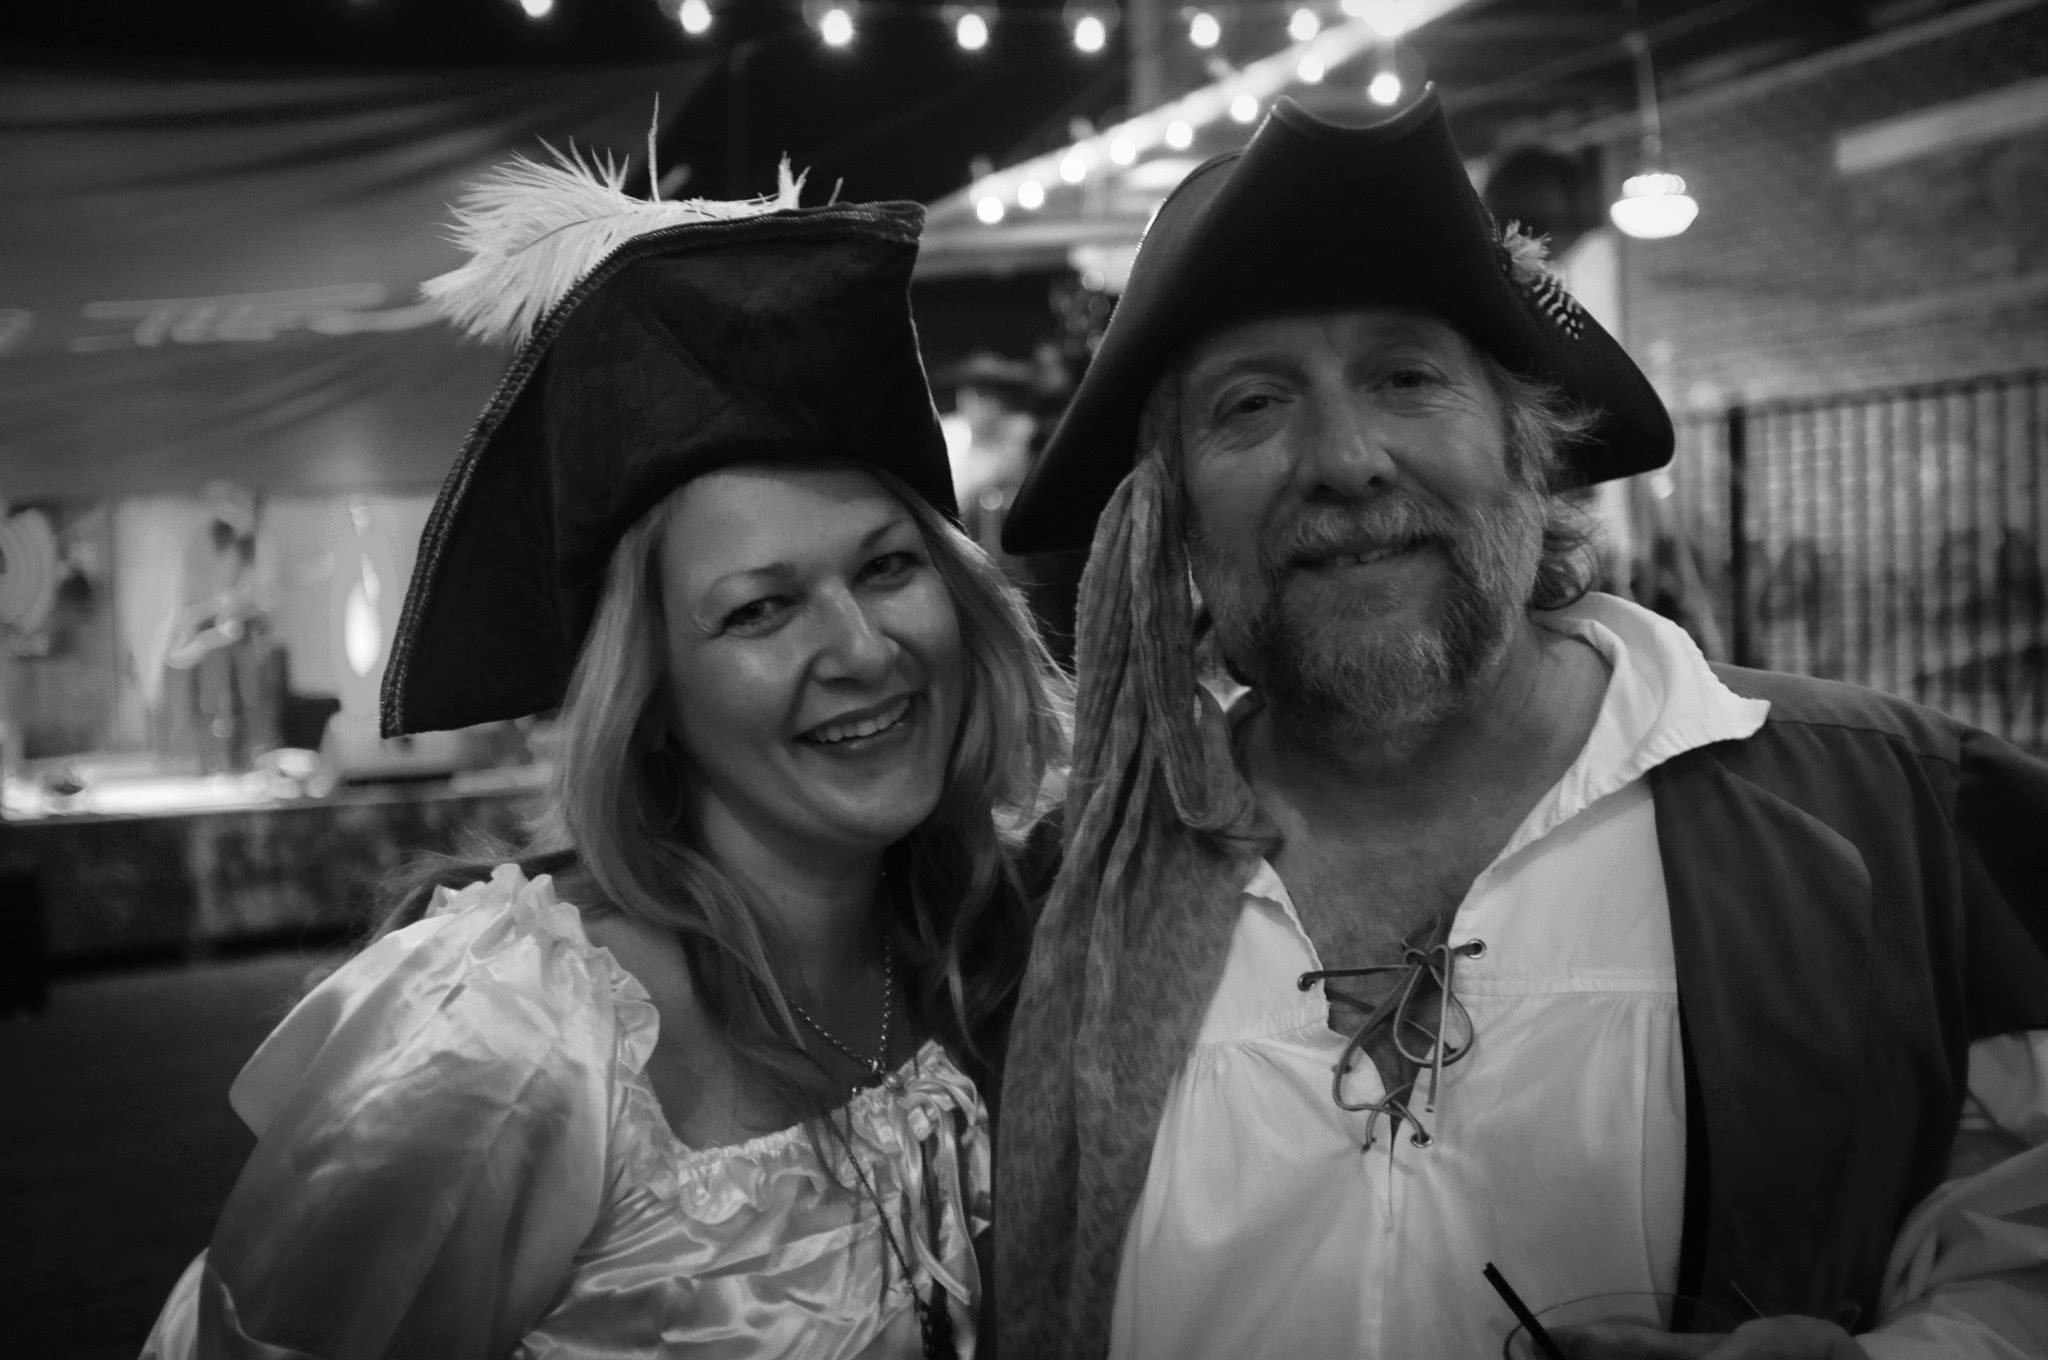 Southside Pirate John Rody and Sallie Rody